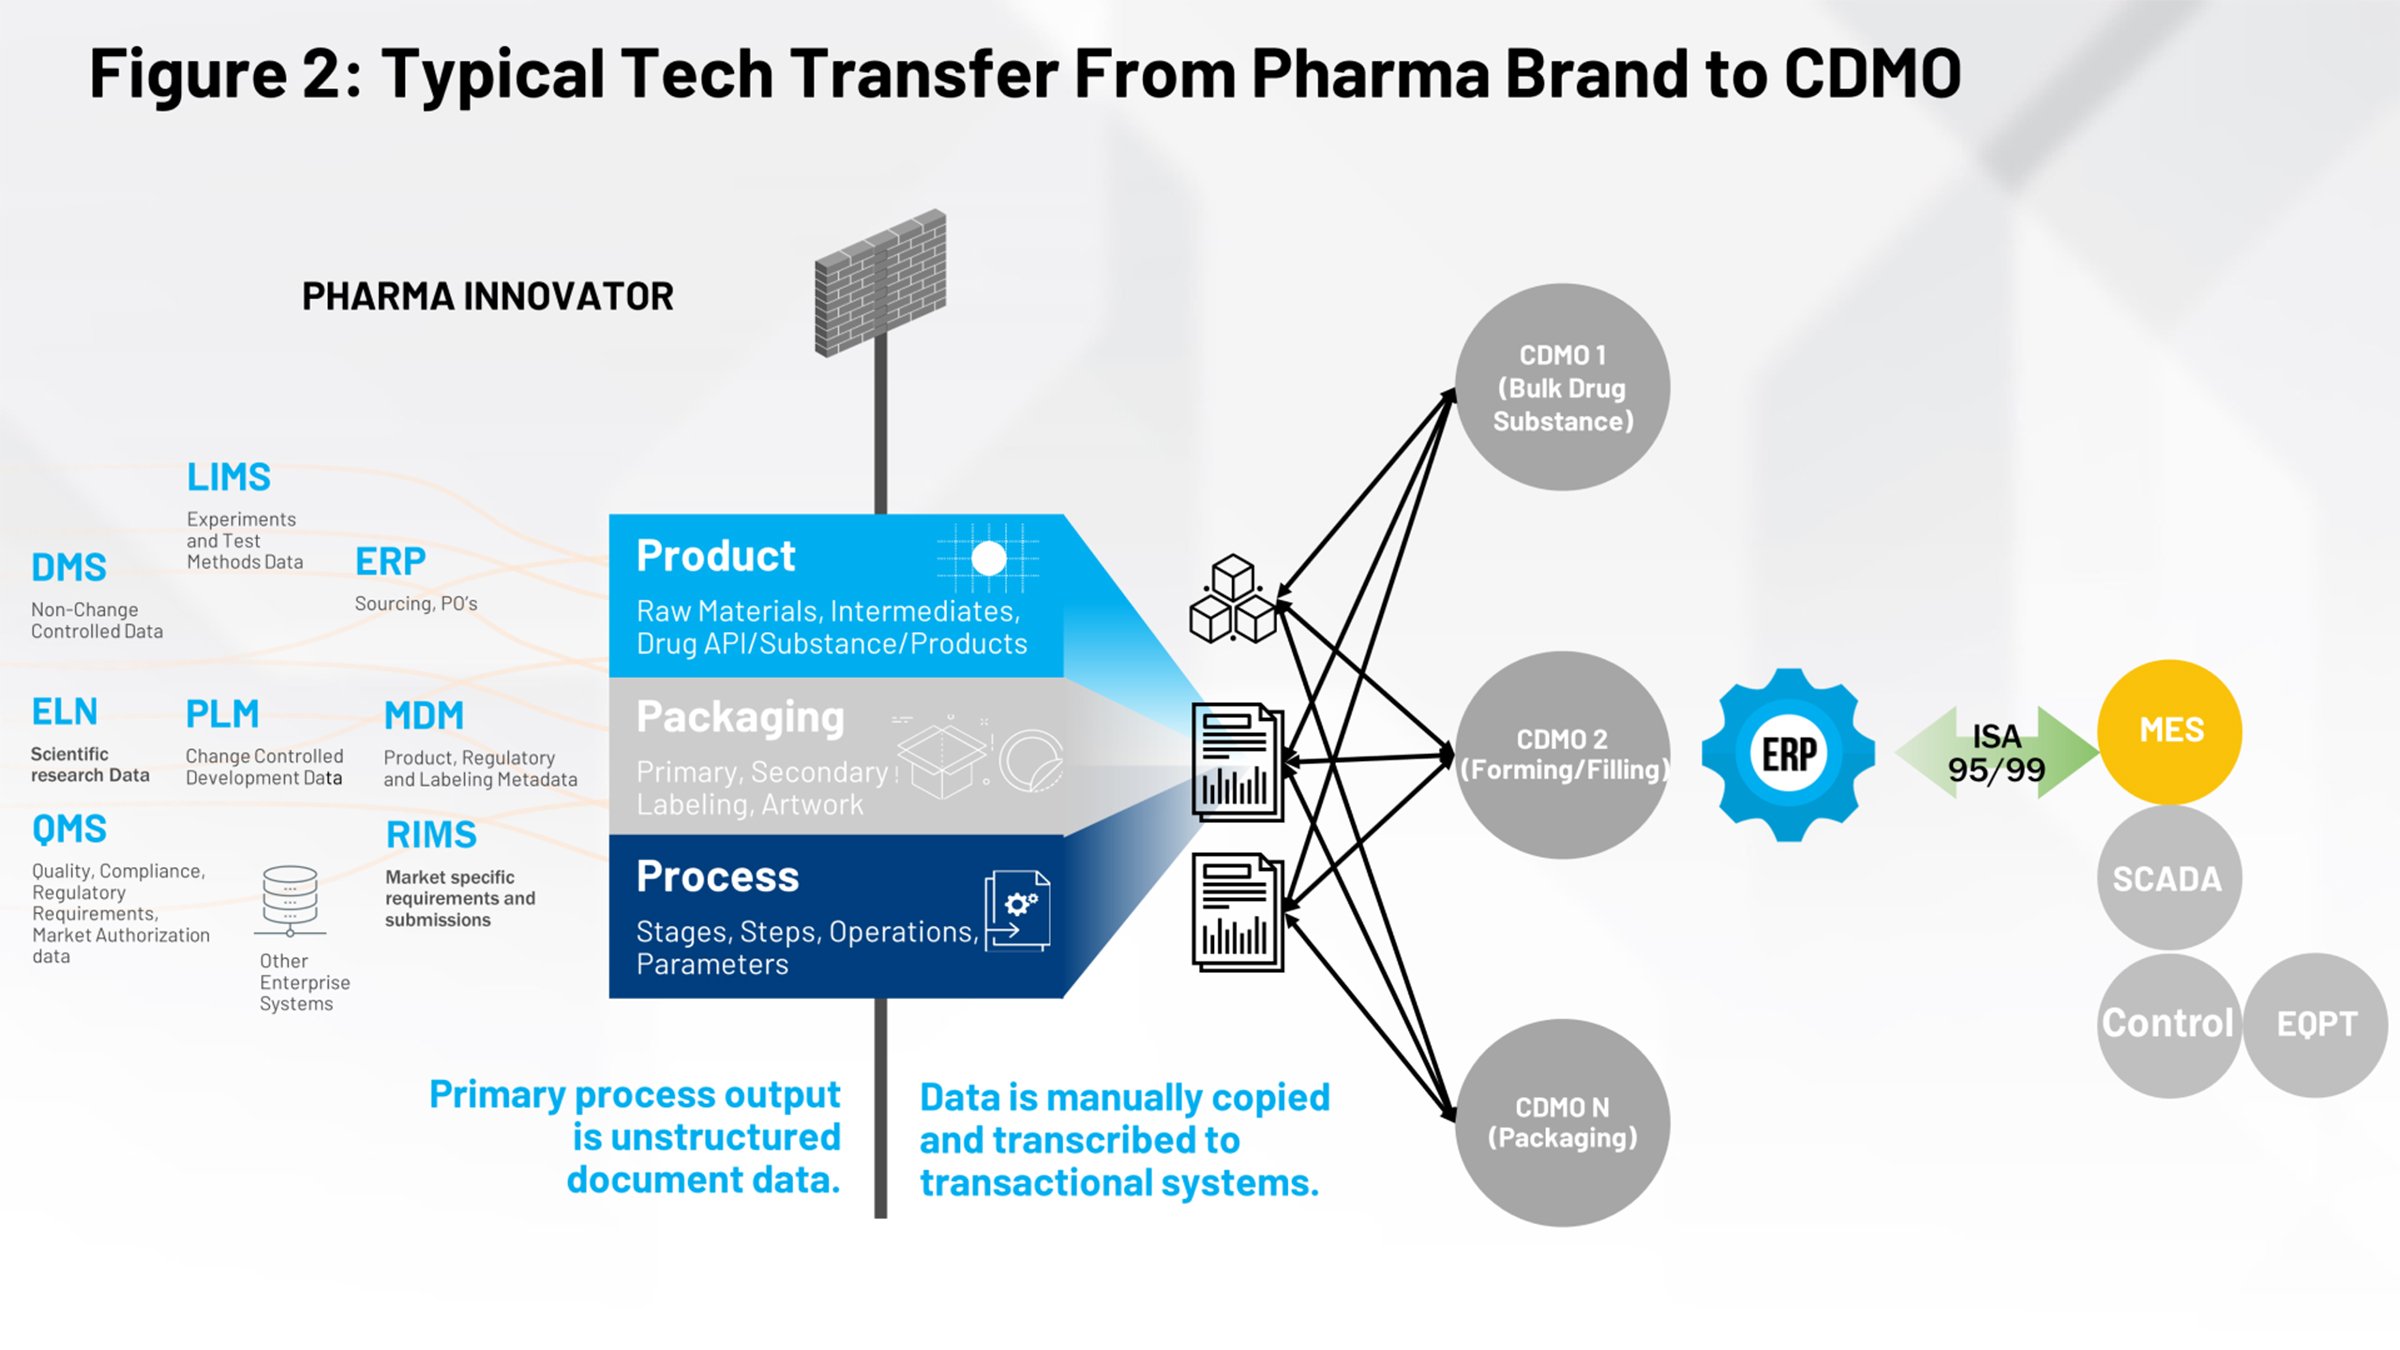 Figure 2: Typical Tech Transfer From Pharma Brand to CDMO